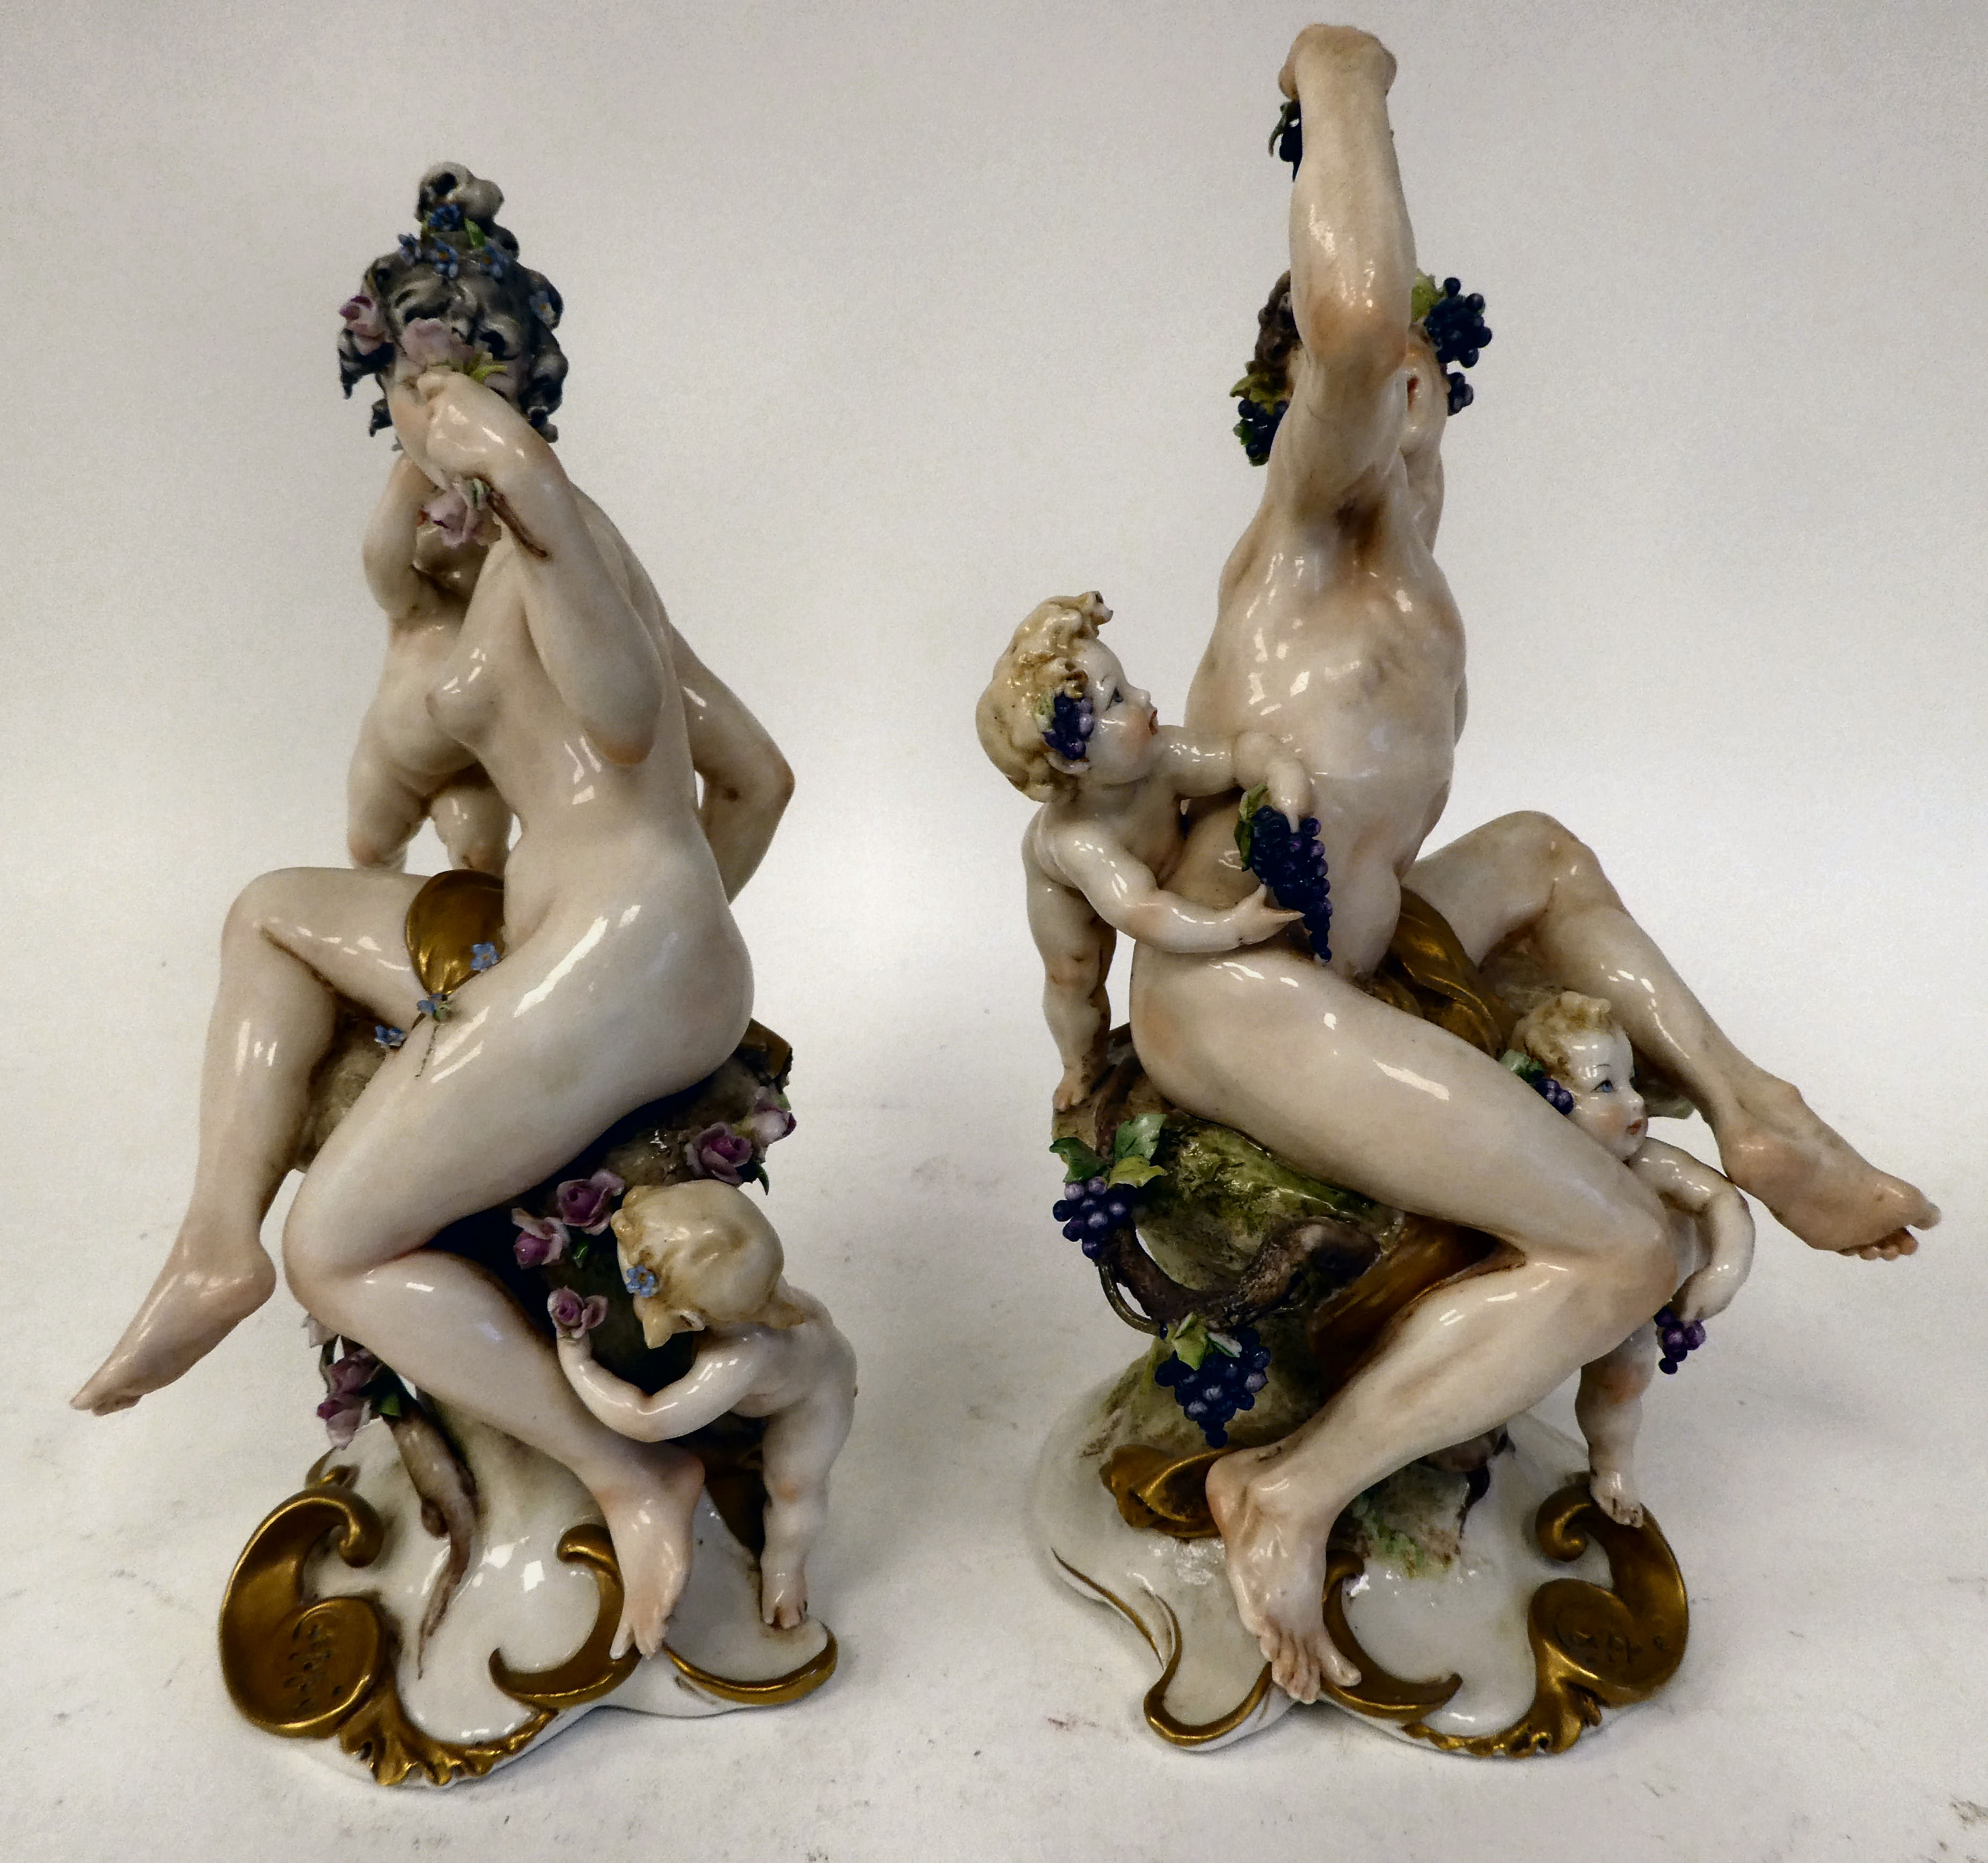 A pair of 20thC Naples porcelain, classically inspired figures with cherubic children  8.5" & 9"h - Image 2 of 4